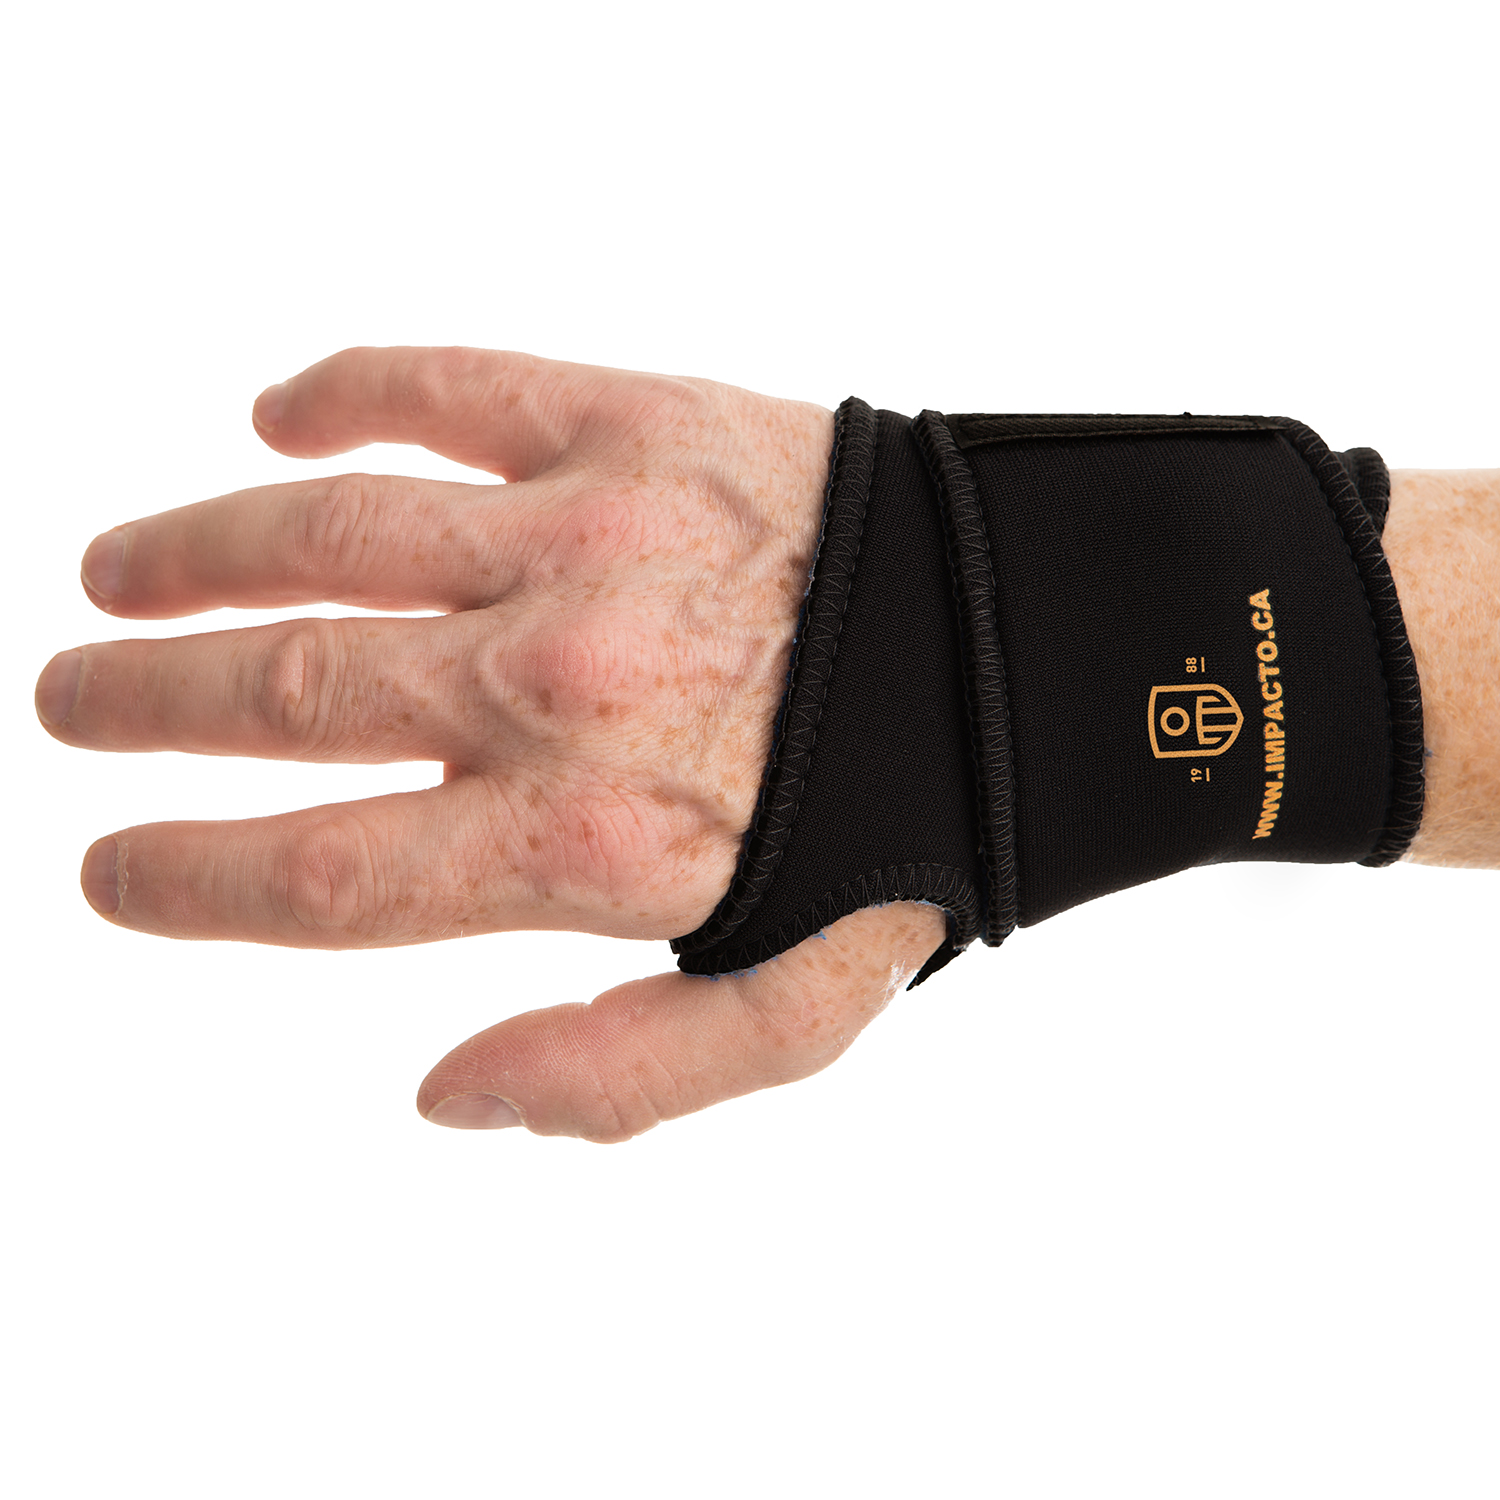 IMPACTO TS226M THERMO WRAP WRIST SUPPORT - Wrist Supports